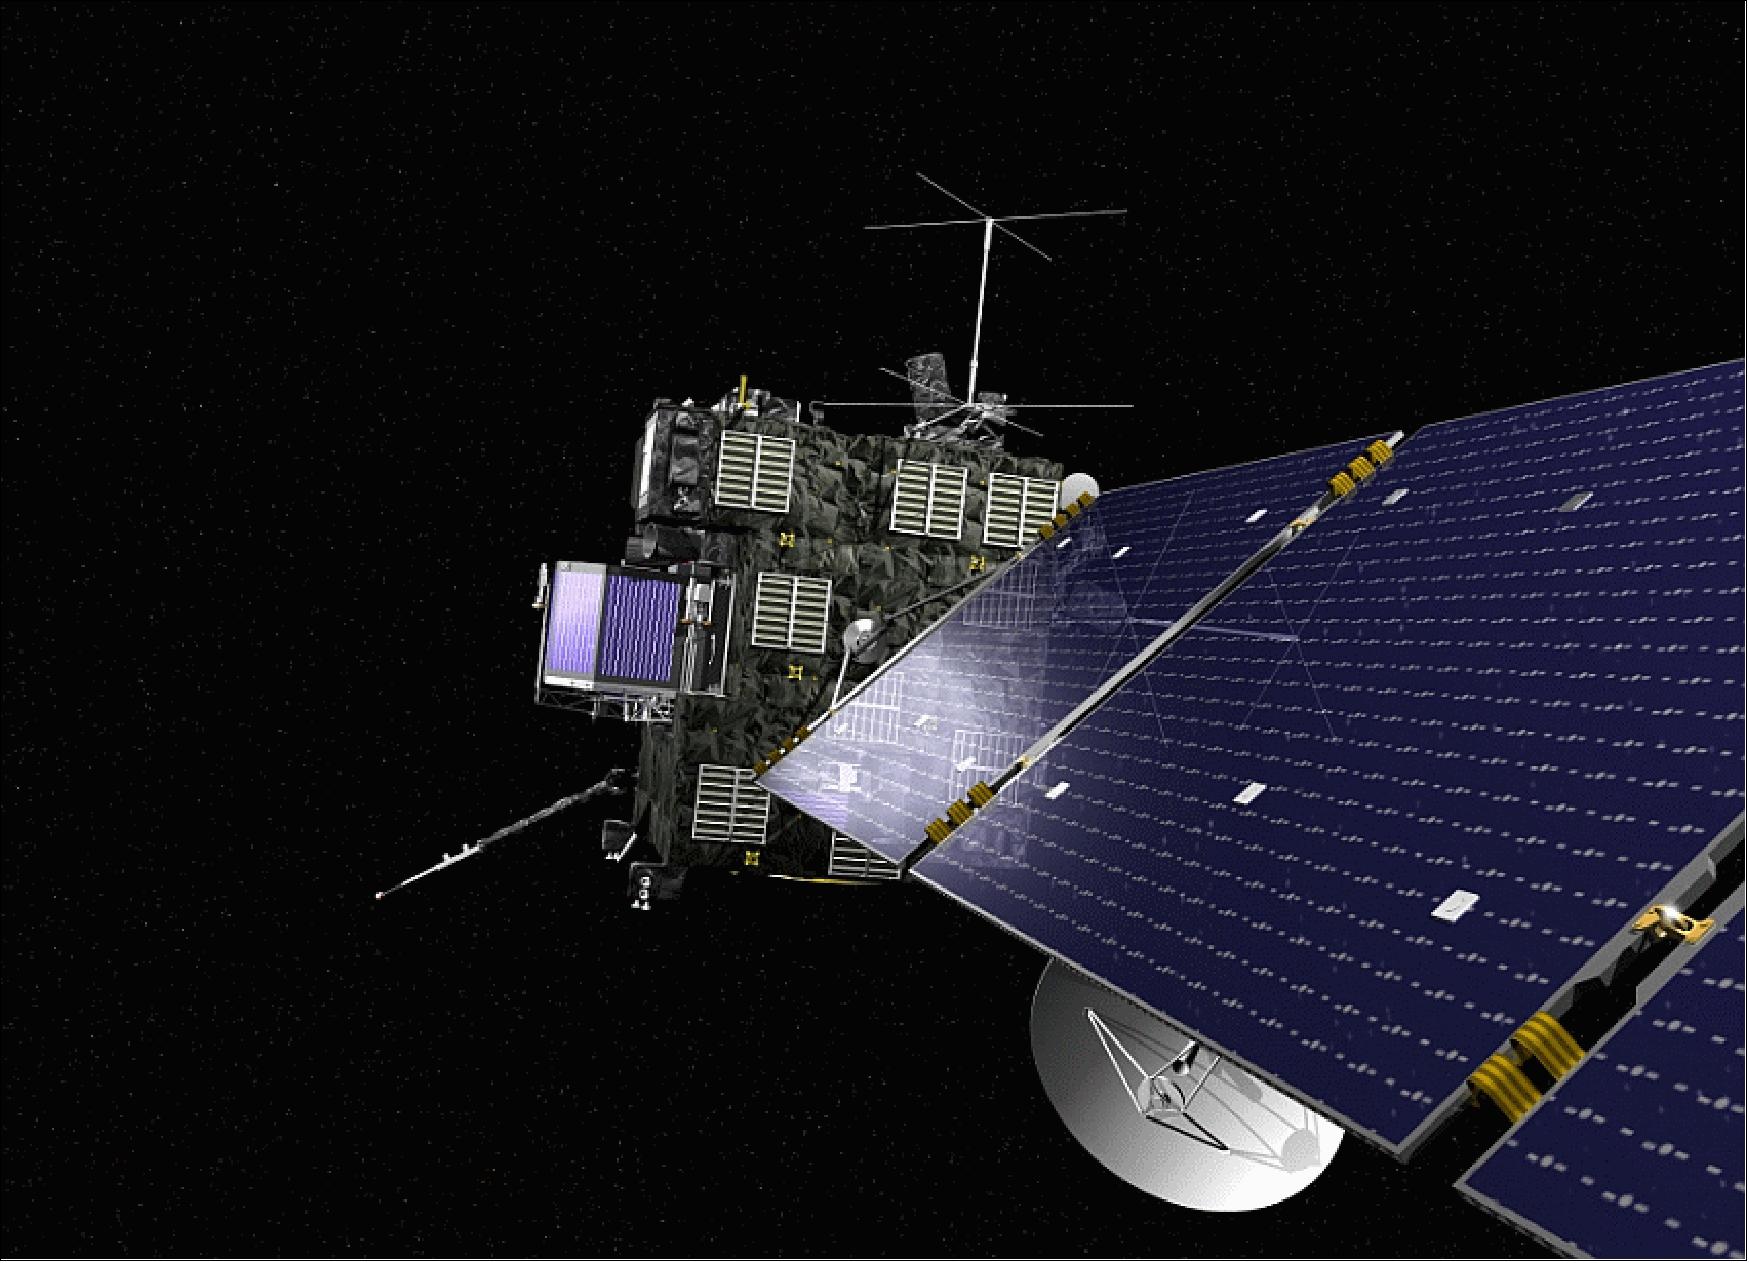 Figure 9: Alternate view of the deployed Rosetta spacecraft showing in particular the solar array configuration (image credit: ESA, AOES Medialab)